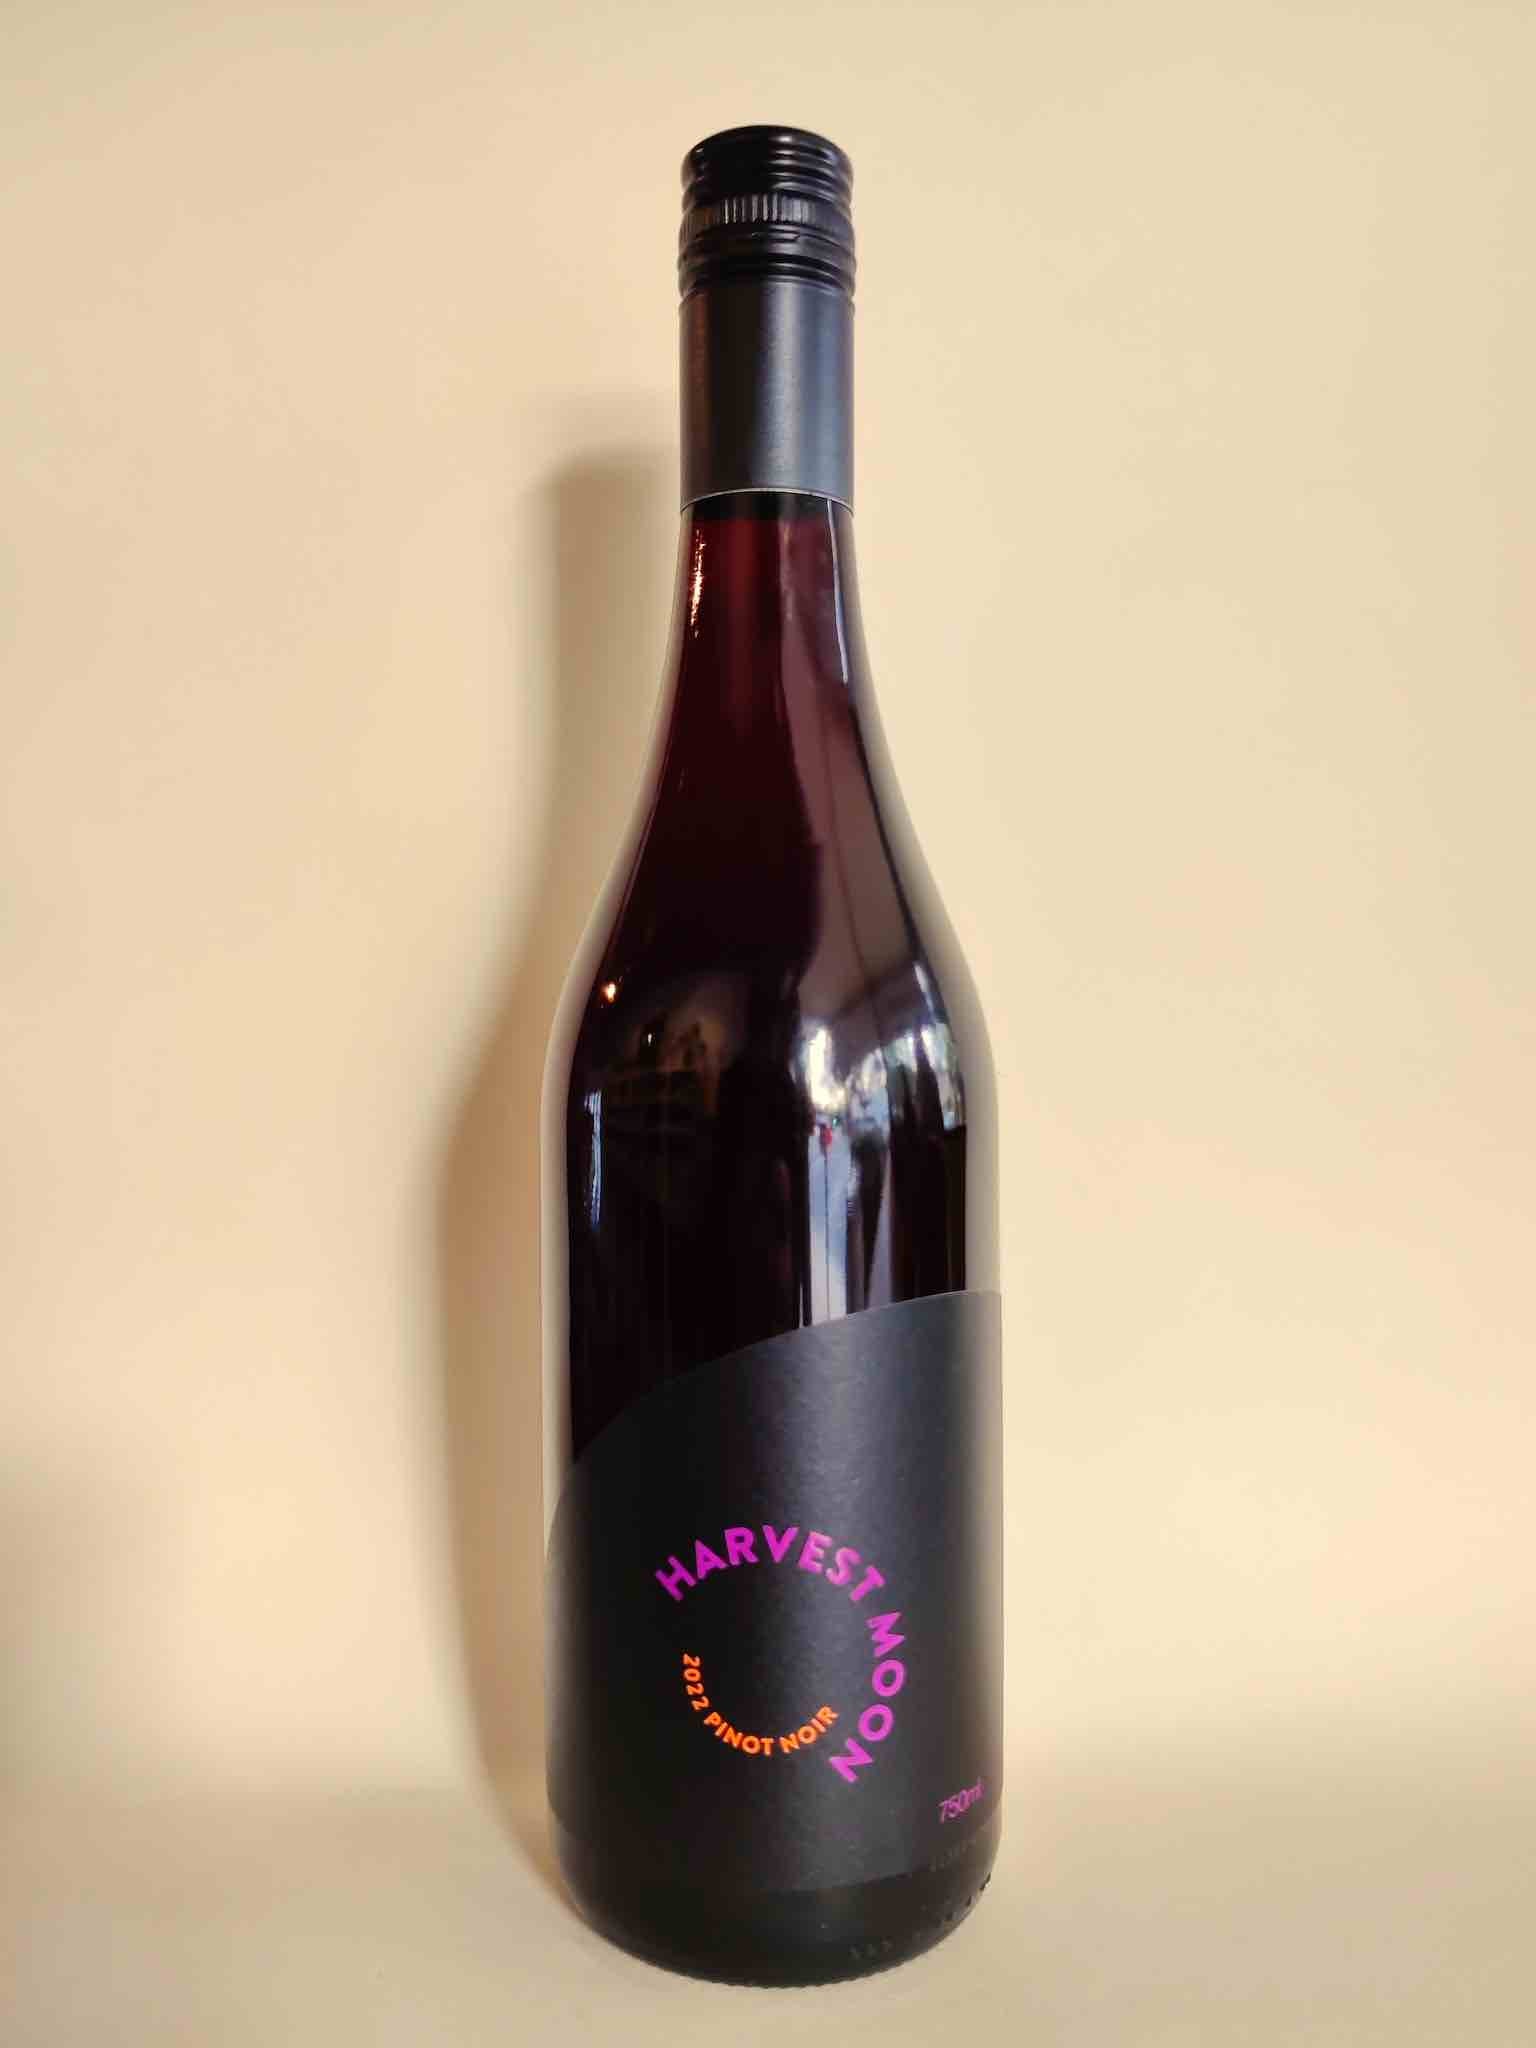 A bottle of Harvest Moon Pinot Noir from King Valley, Victoria.